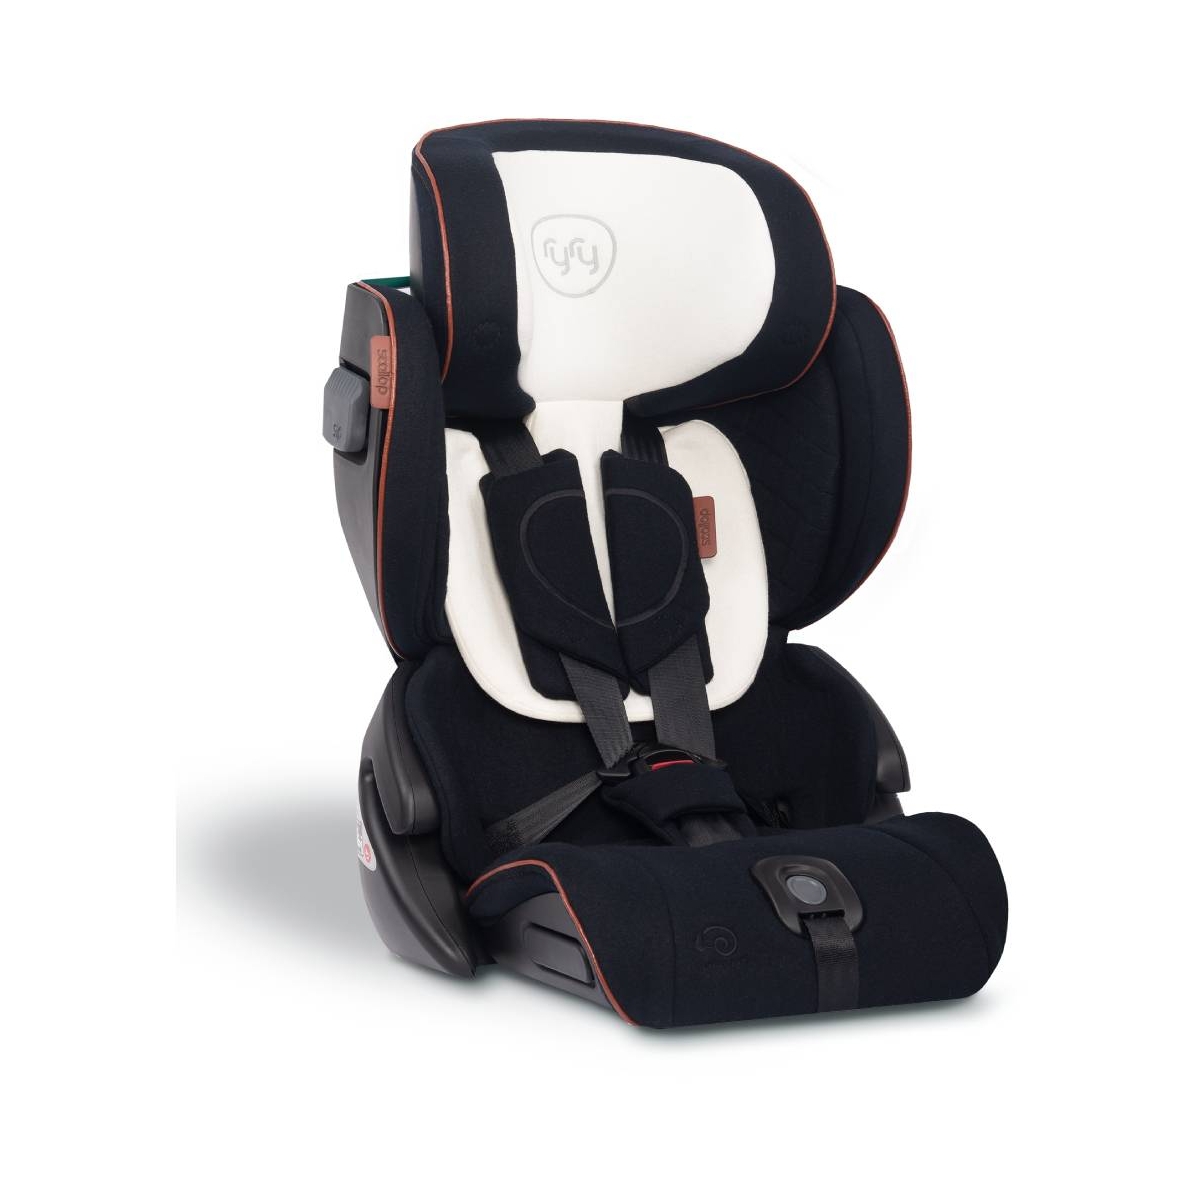 RyRy Scallop Compact Car Seat